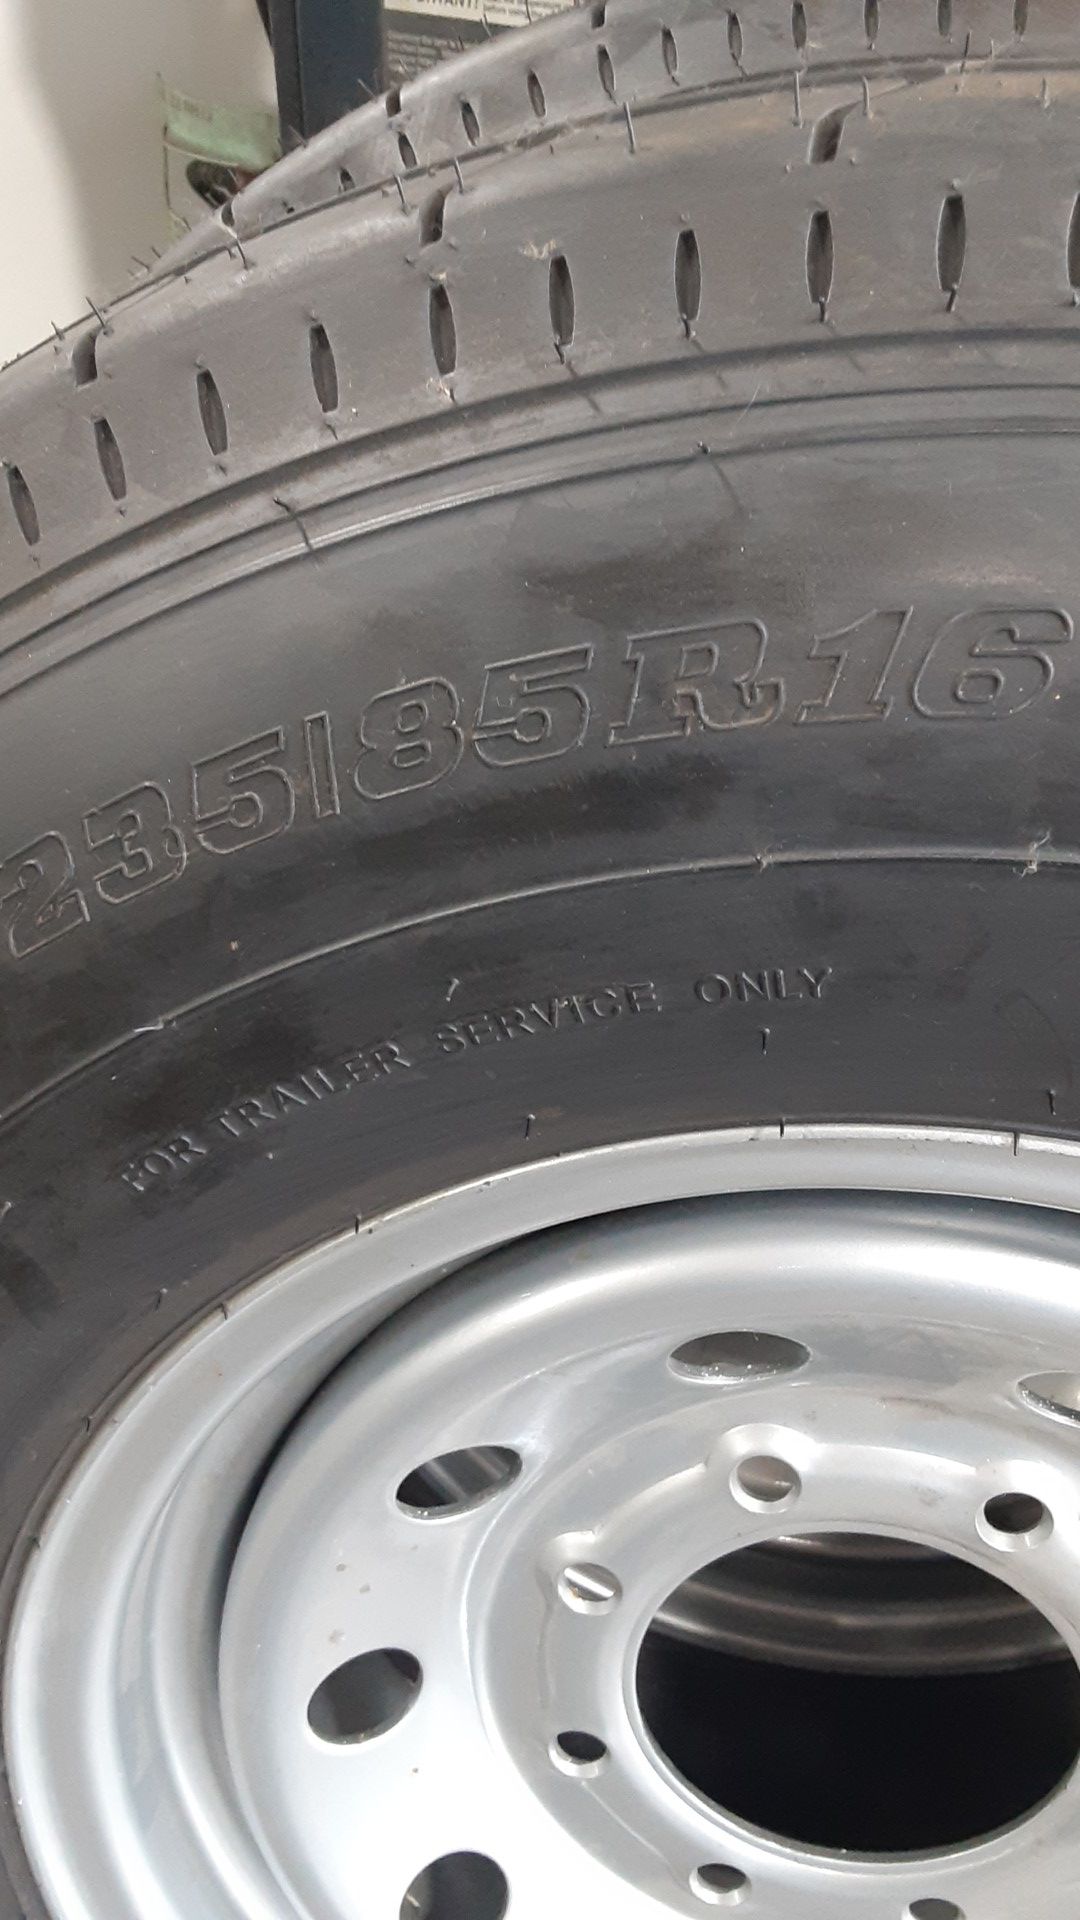 Two new trailer tires 235/85R16